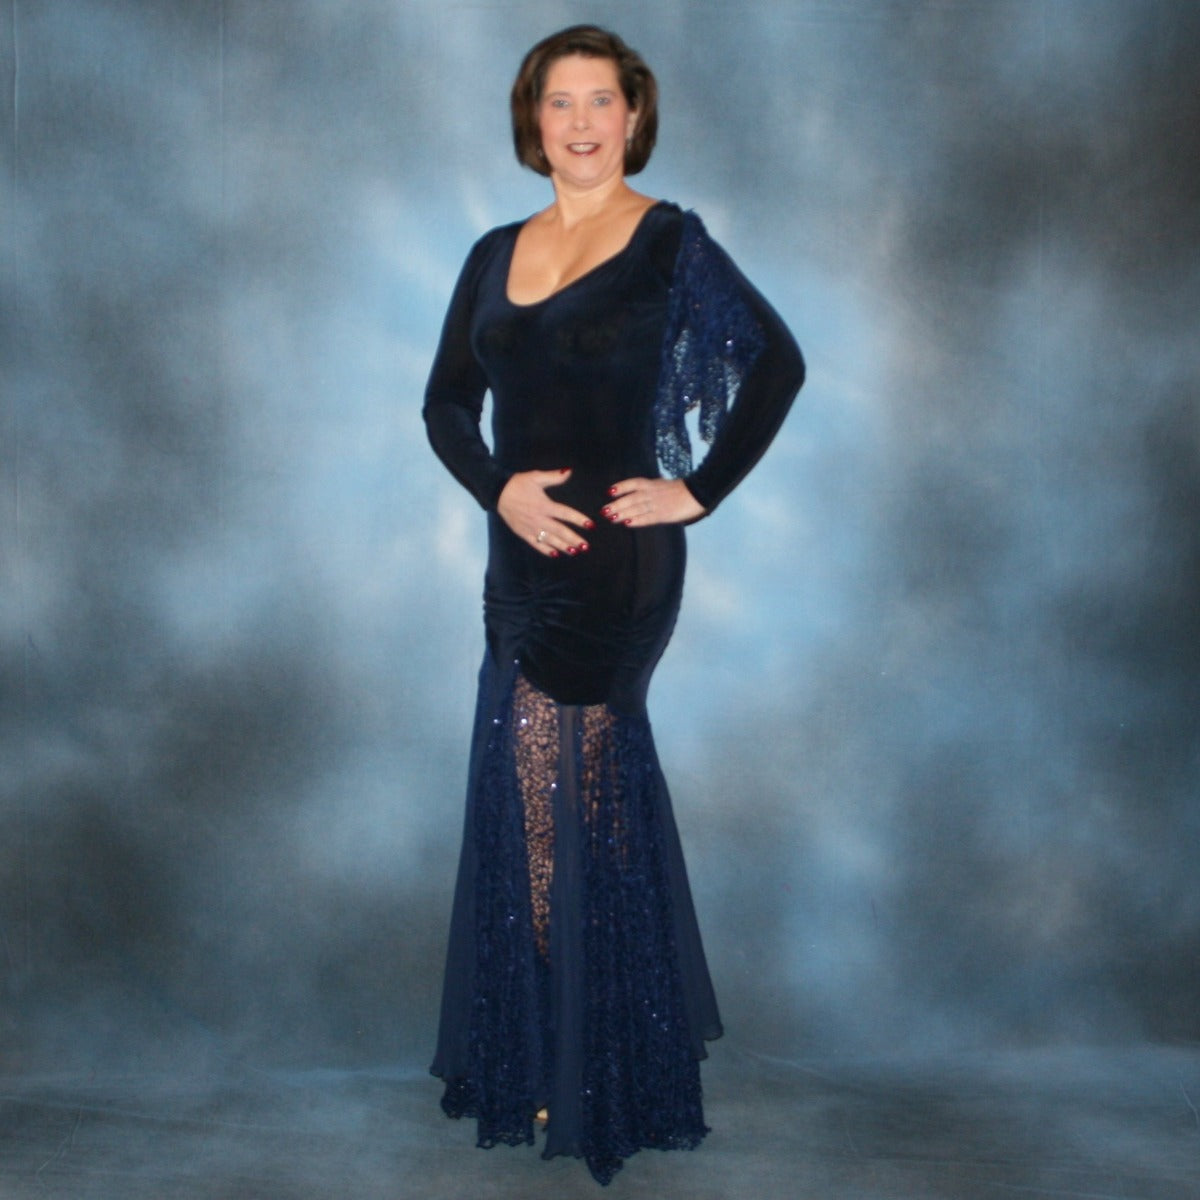 Crystal's Creations side view of Ballroom dress created in luxurious navy blue solid slinky fabric with yards of gorgeous unique sequined mermaid net look lace & chiffon. The bottom of base of dress has ruching at the hip. A great social dress for any ballroom dance or special occasion, as well as a great beginner show dress!